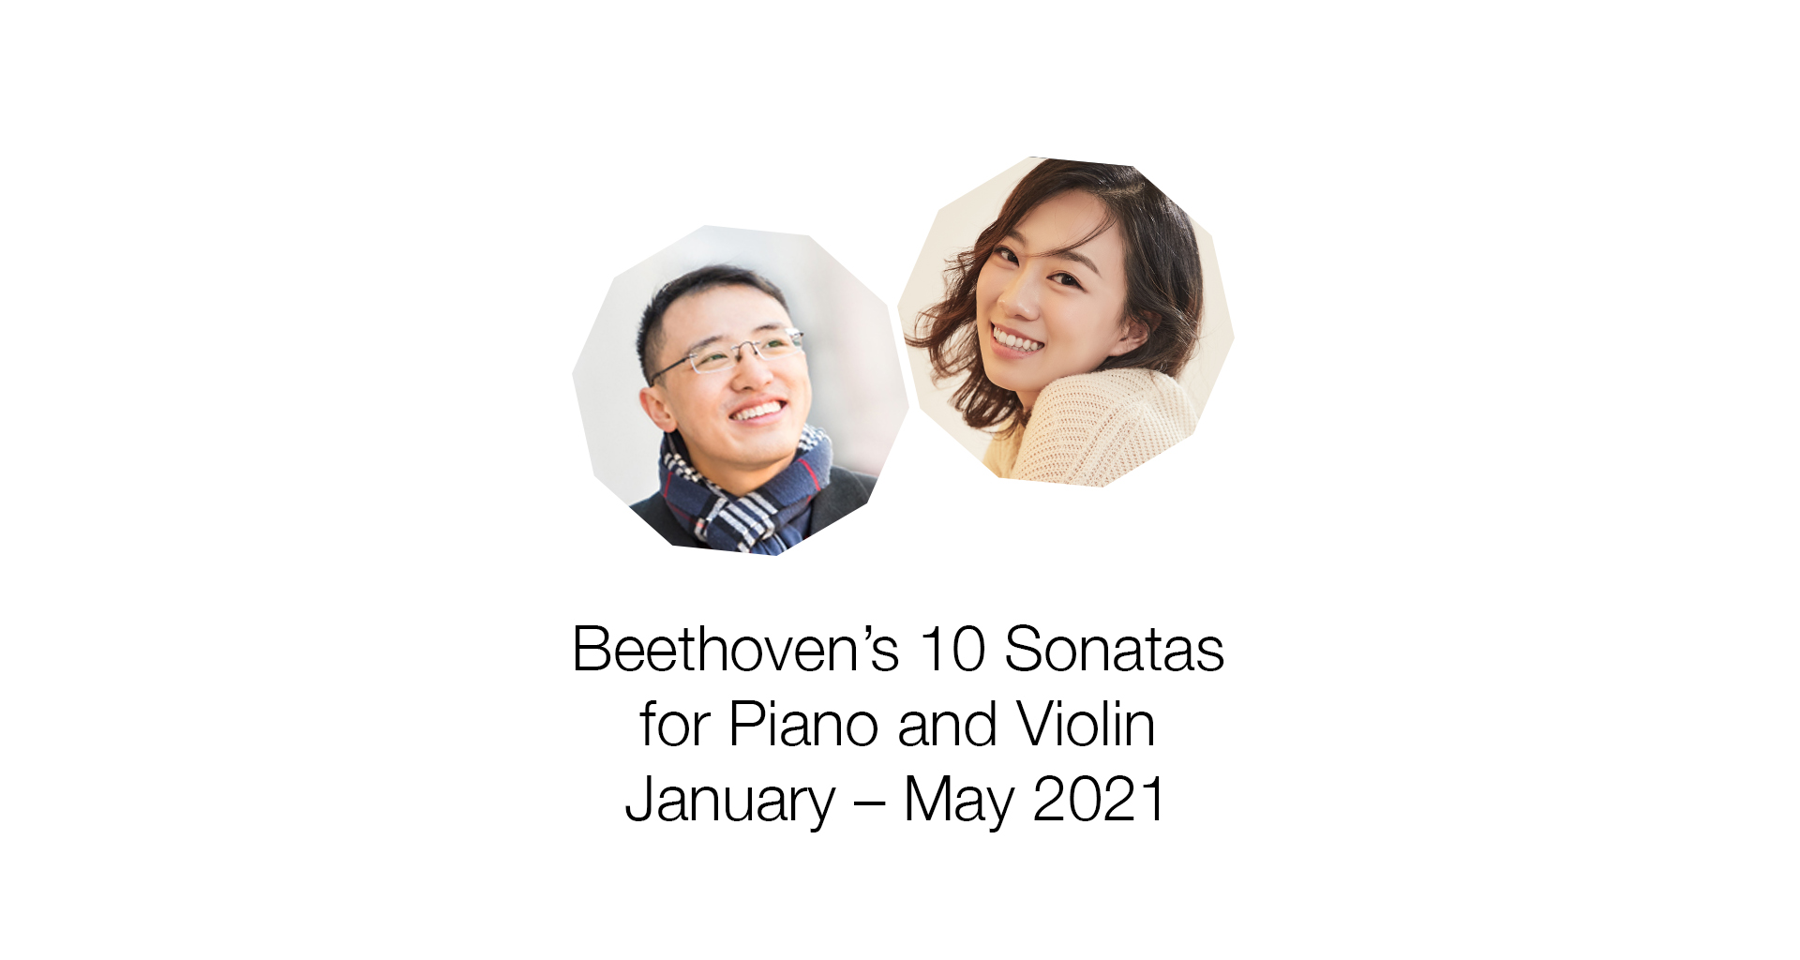 Max Tan and Friends: The Beethoven Sonata Cycle - Op. 23 & 24 (Little Spring)